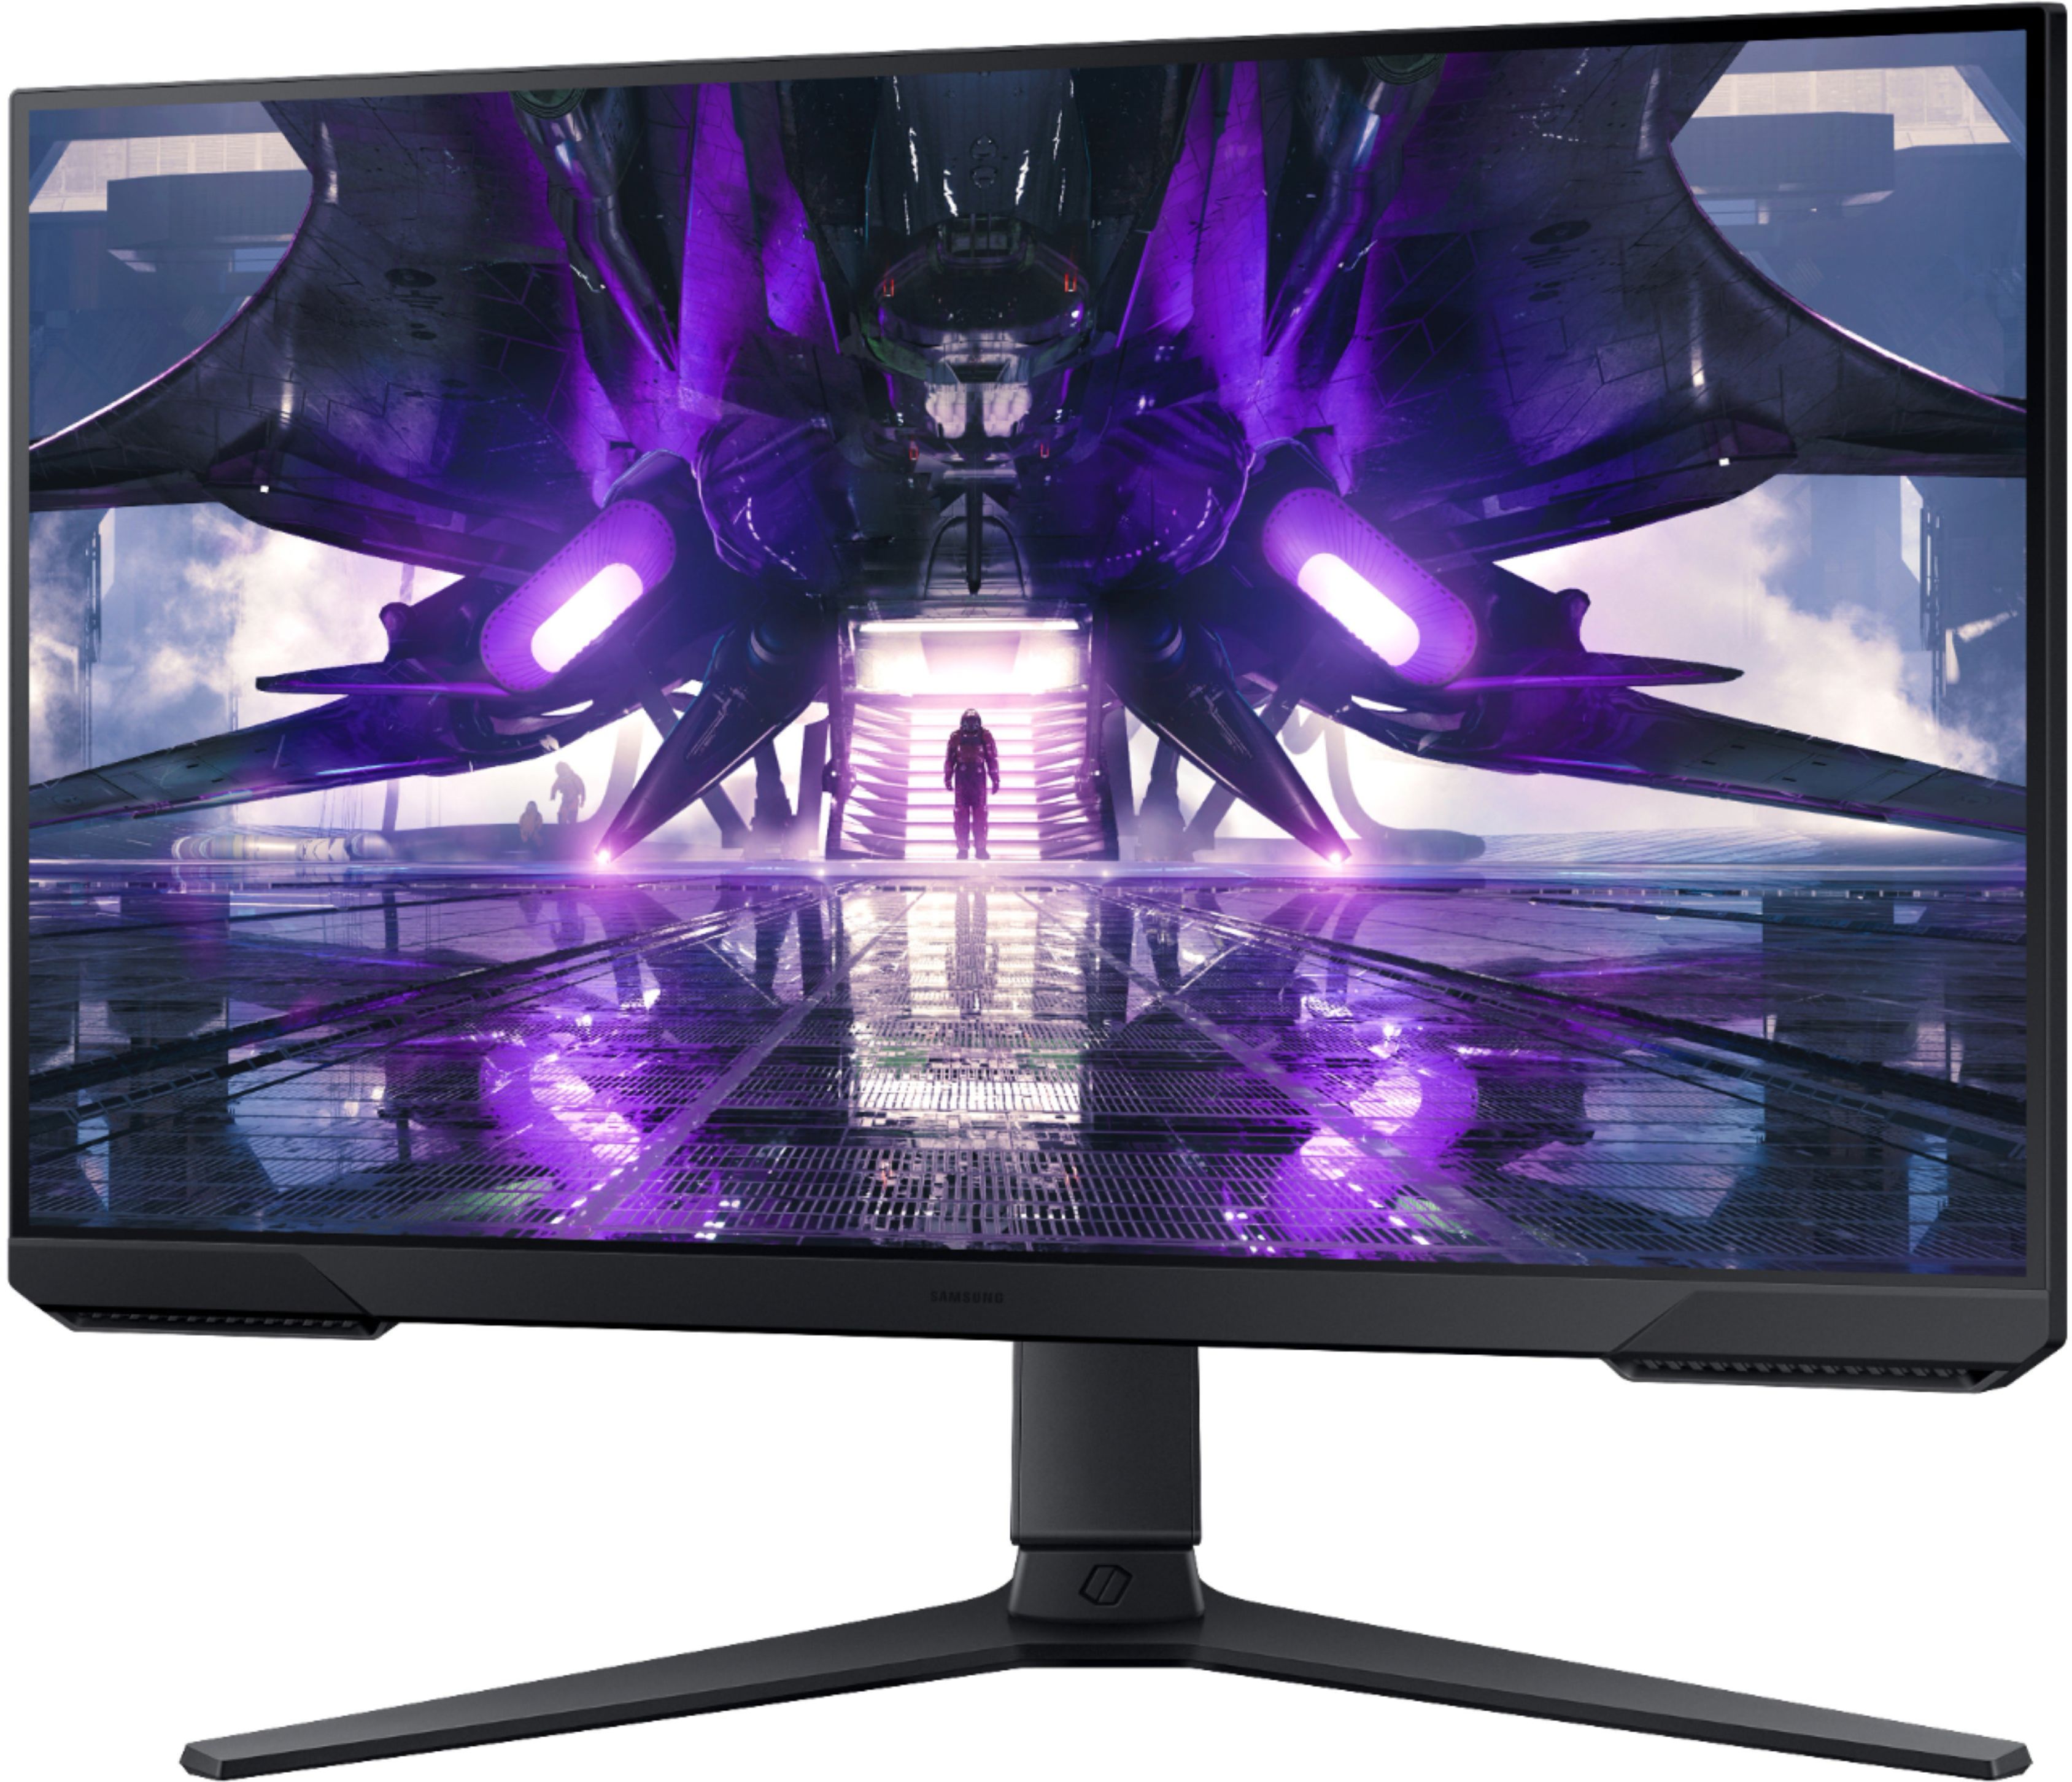 Competitive Samsung Odyssey G3 gaming monitor gets price cut in time for MW3